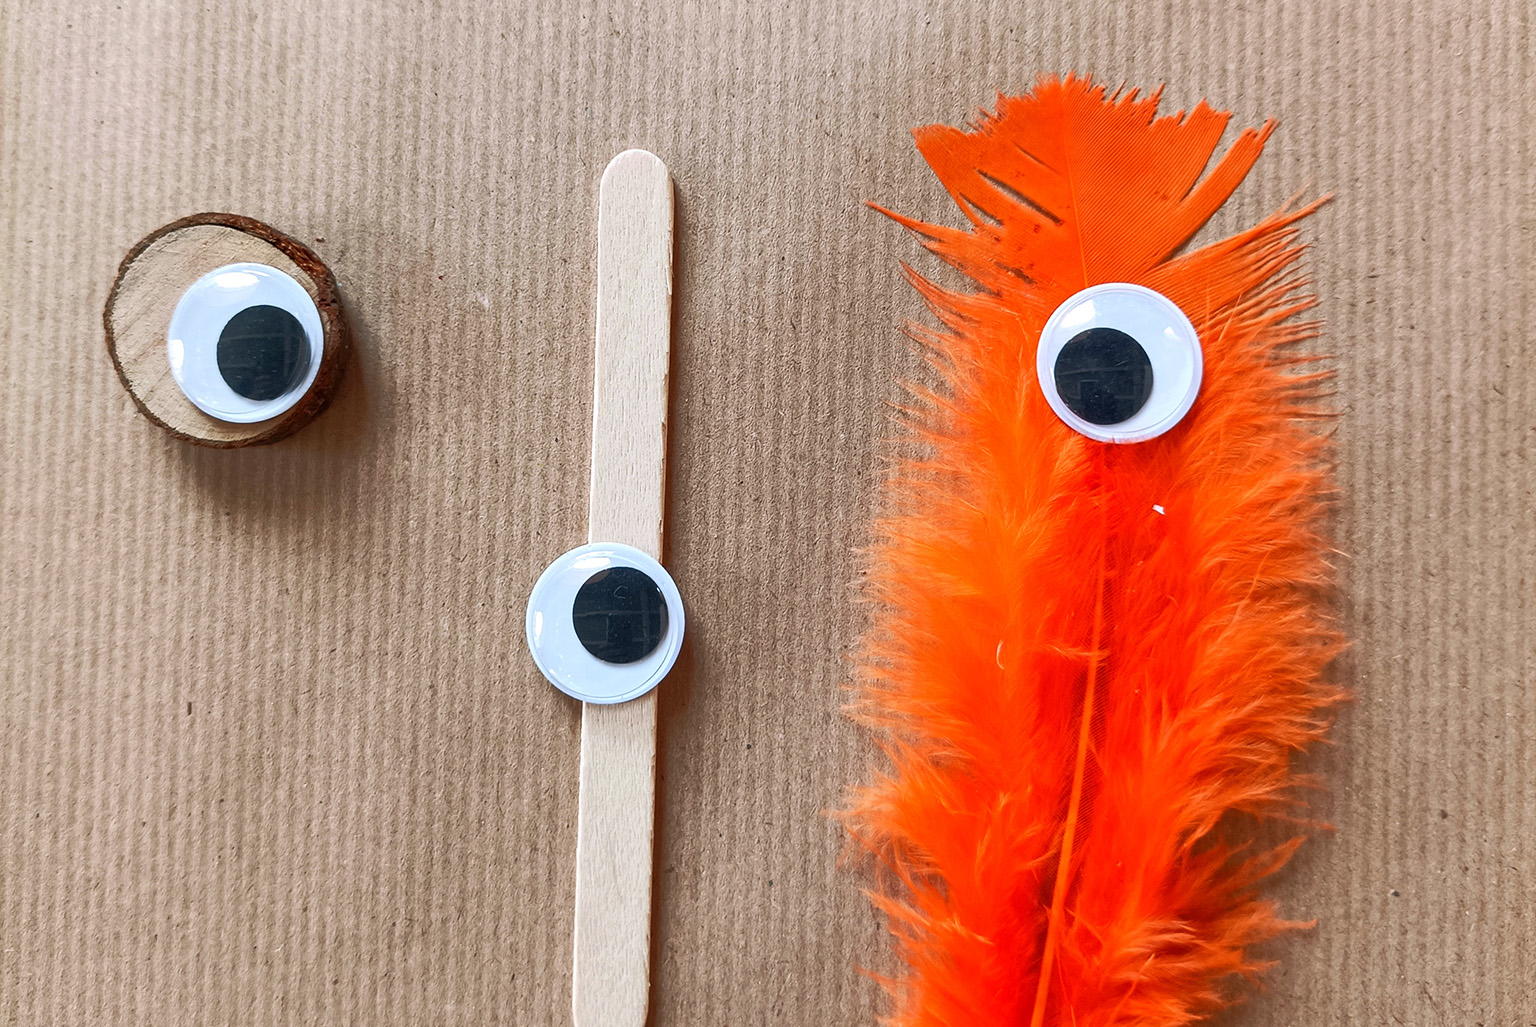 Three elements that make up a kind of tactile comic, as if they were three characters: on the left, a wooden wheel with an eye; in the center, a wooden stick with an eye; on the right, a feather with an eye. The three characters are placed on a cardboard surface and are looking at each other.